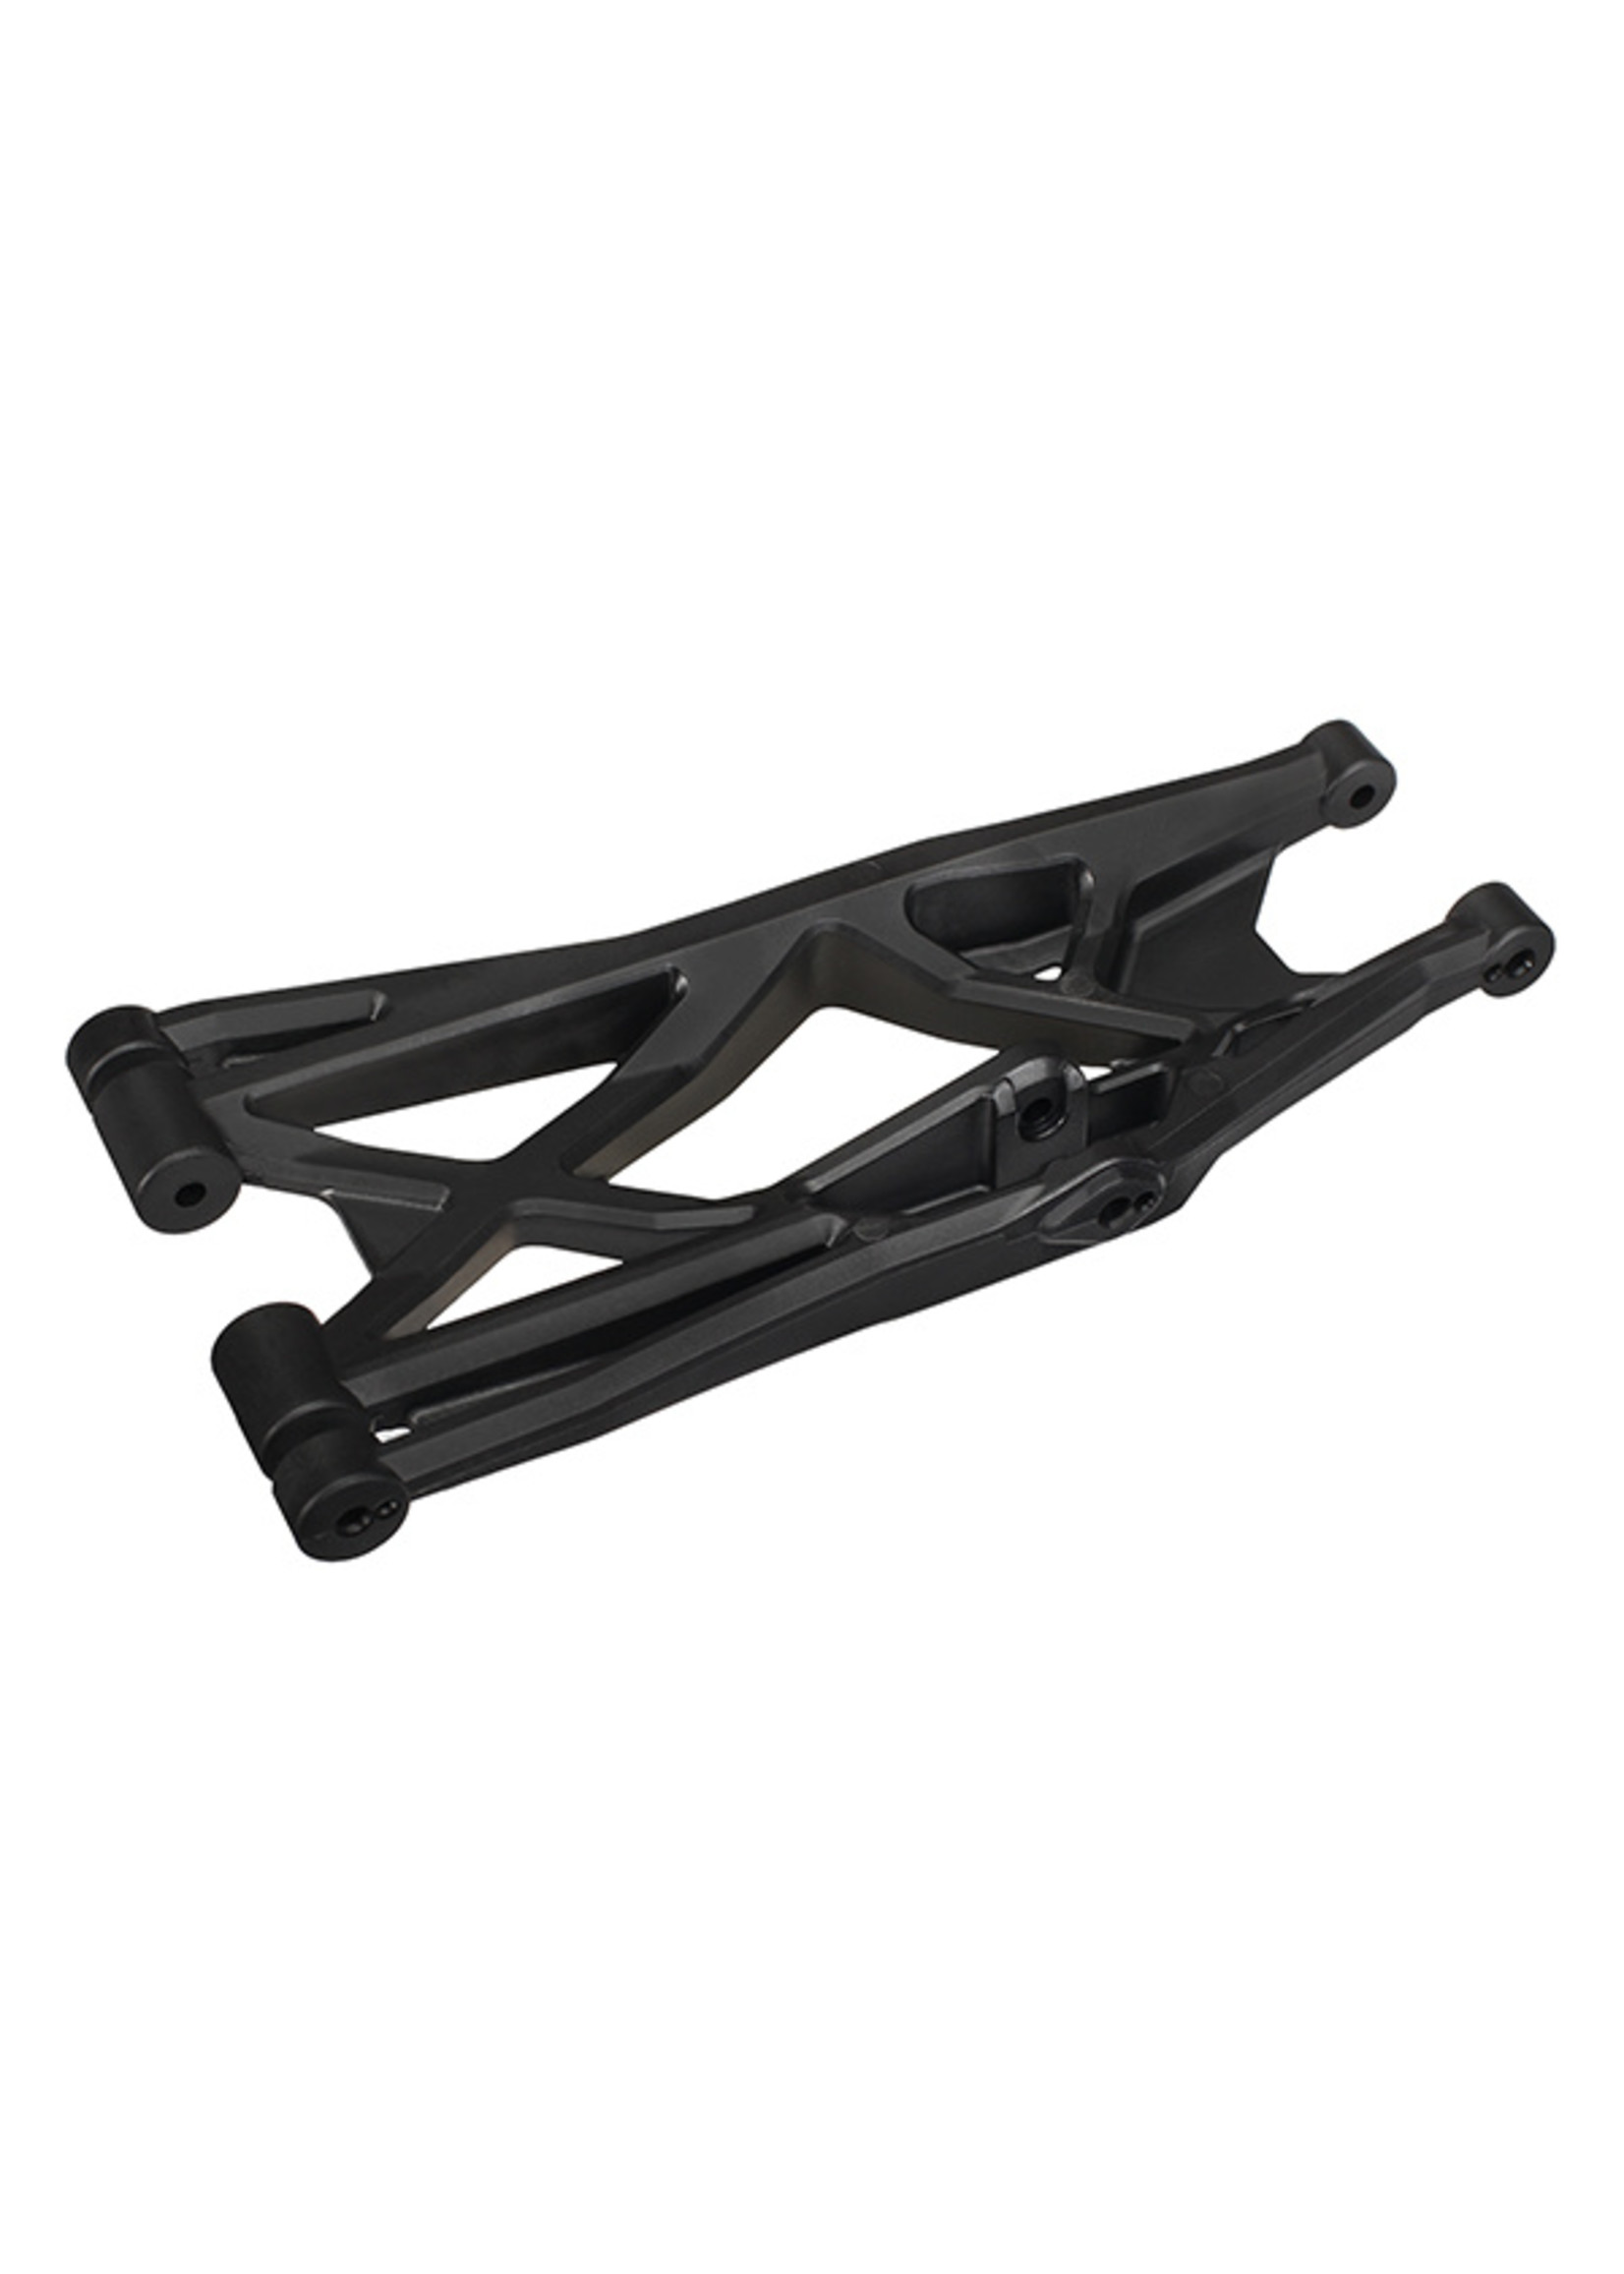 Traxxas 7731 - Suspension Arm Lower Left (Front or Rear) for X-Maxx